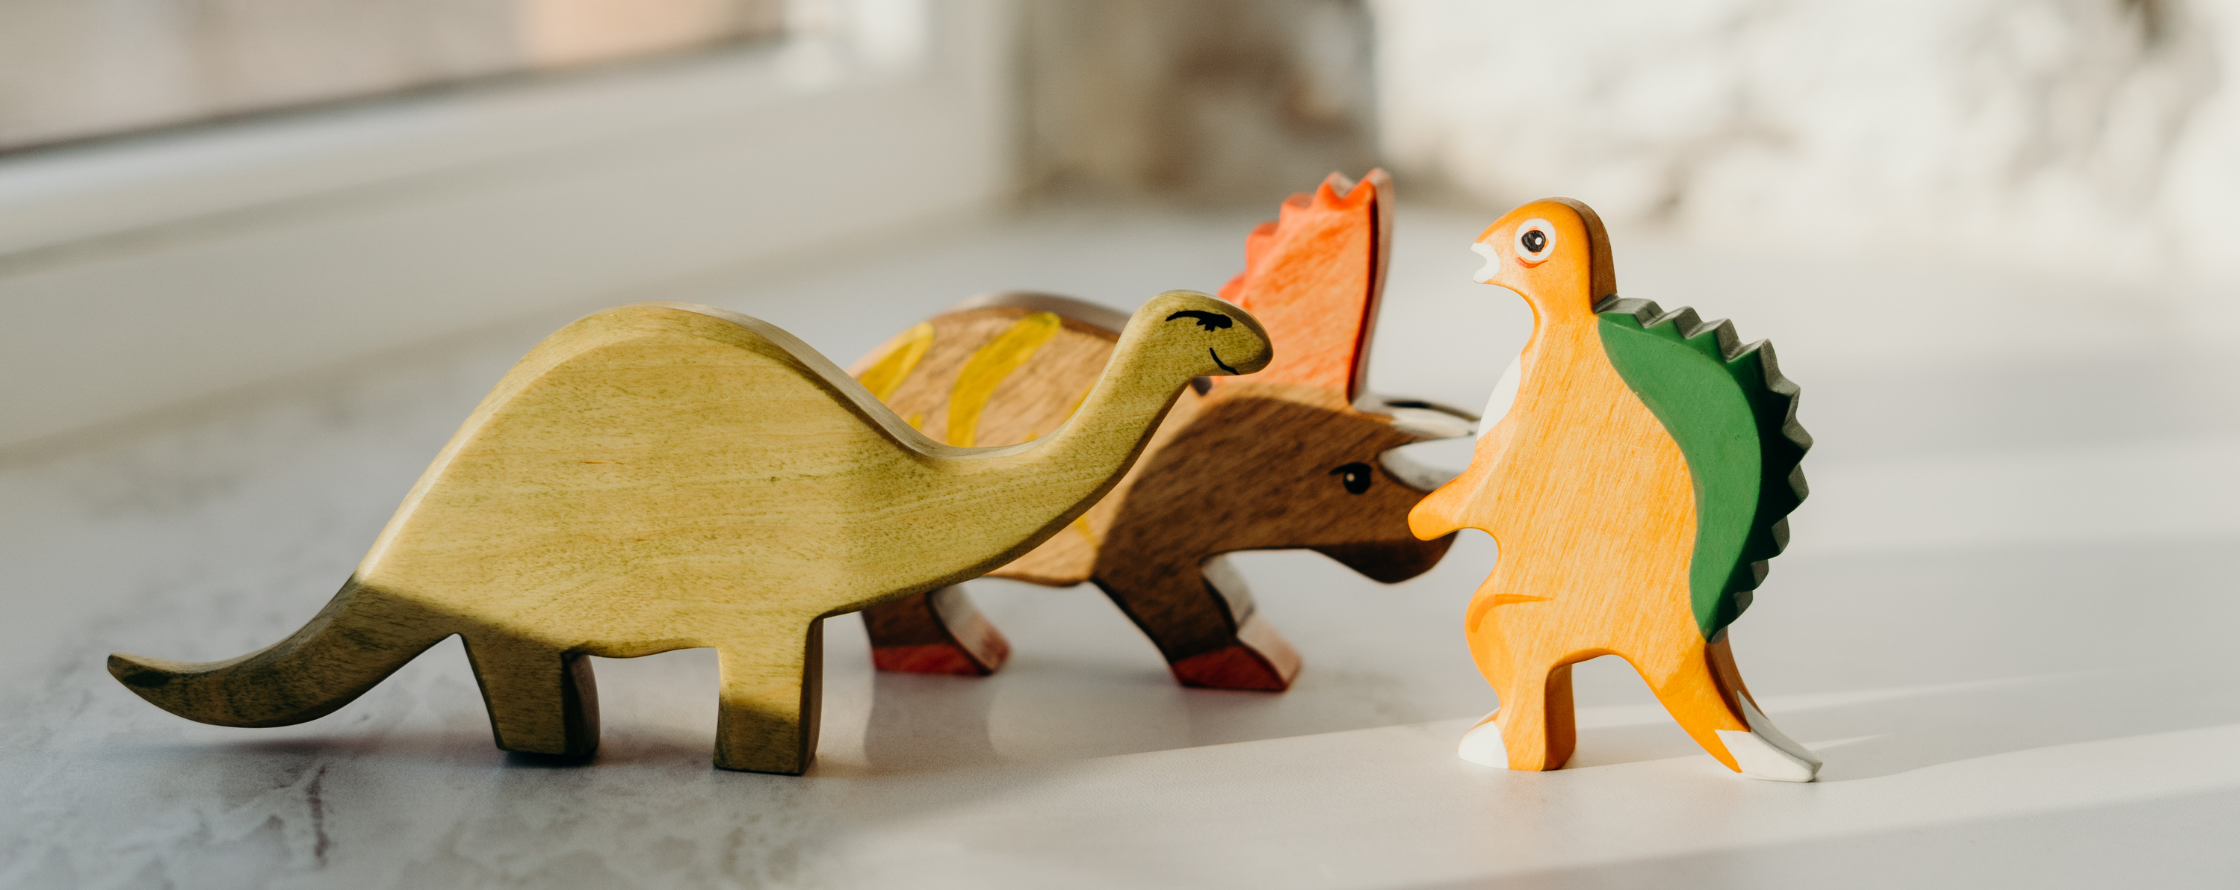 Picture of 3 wooden toy dinosaurs